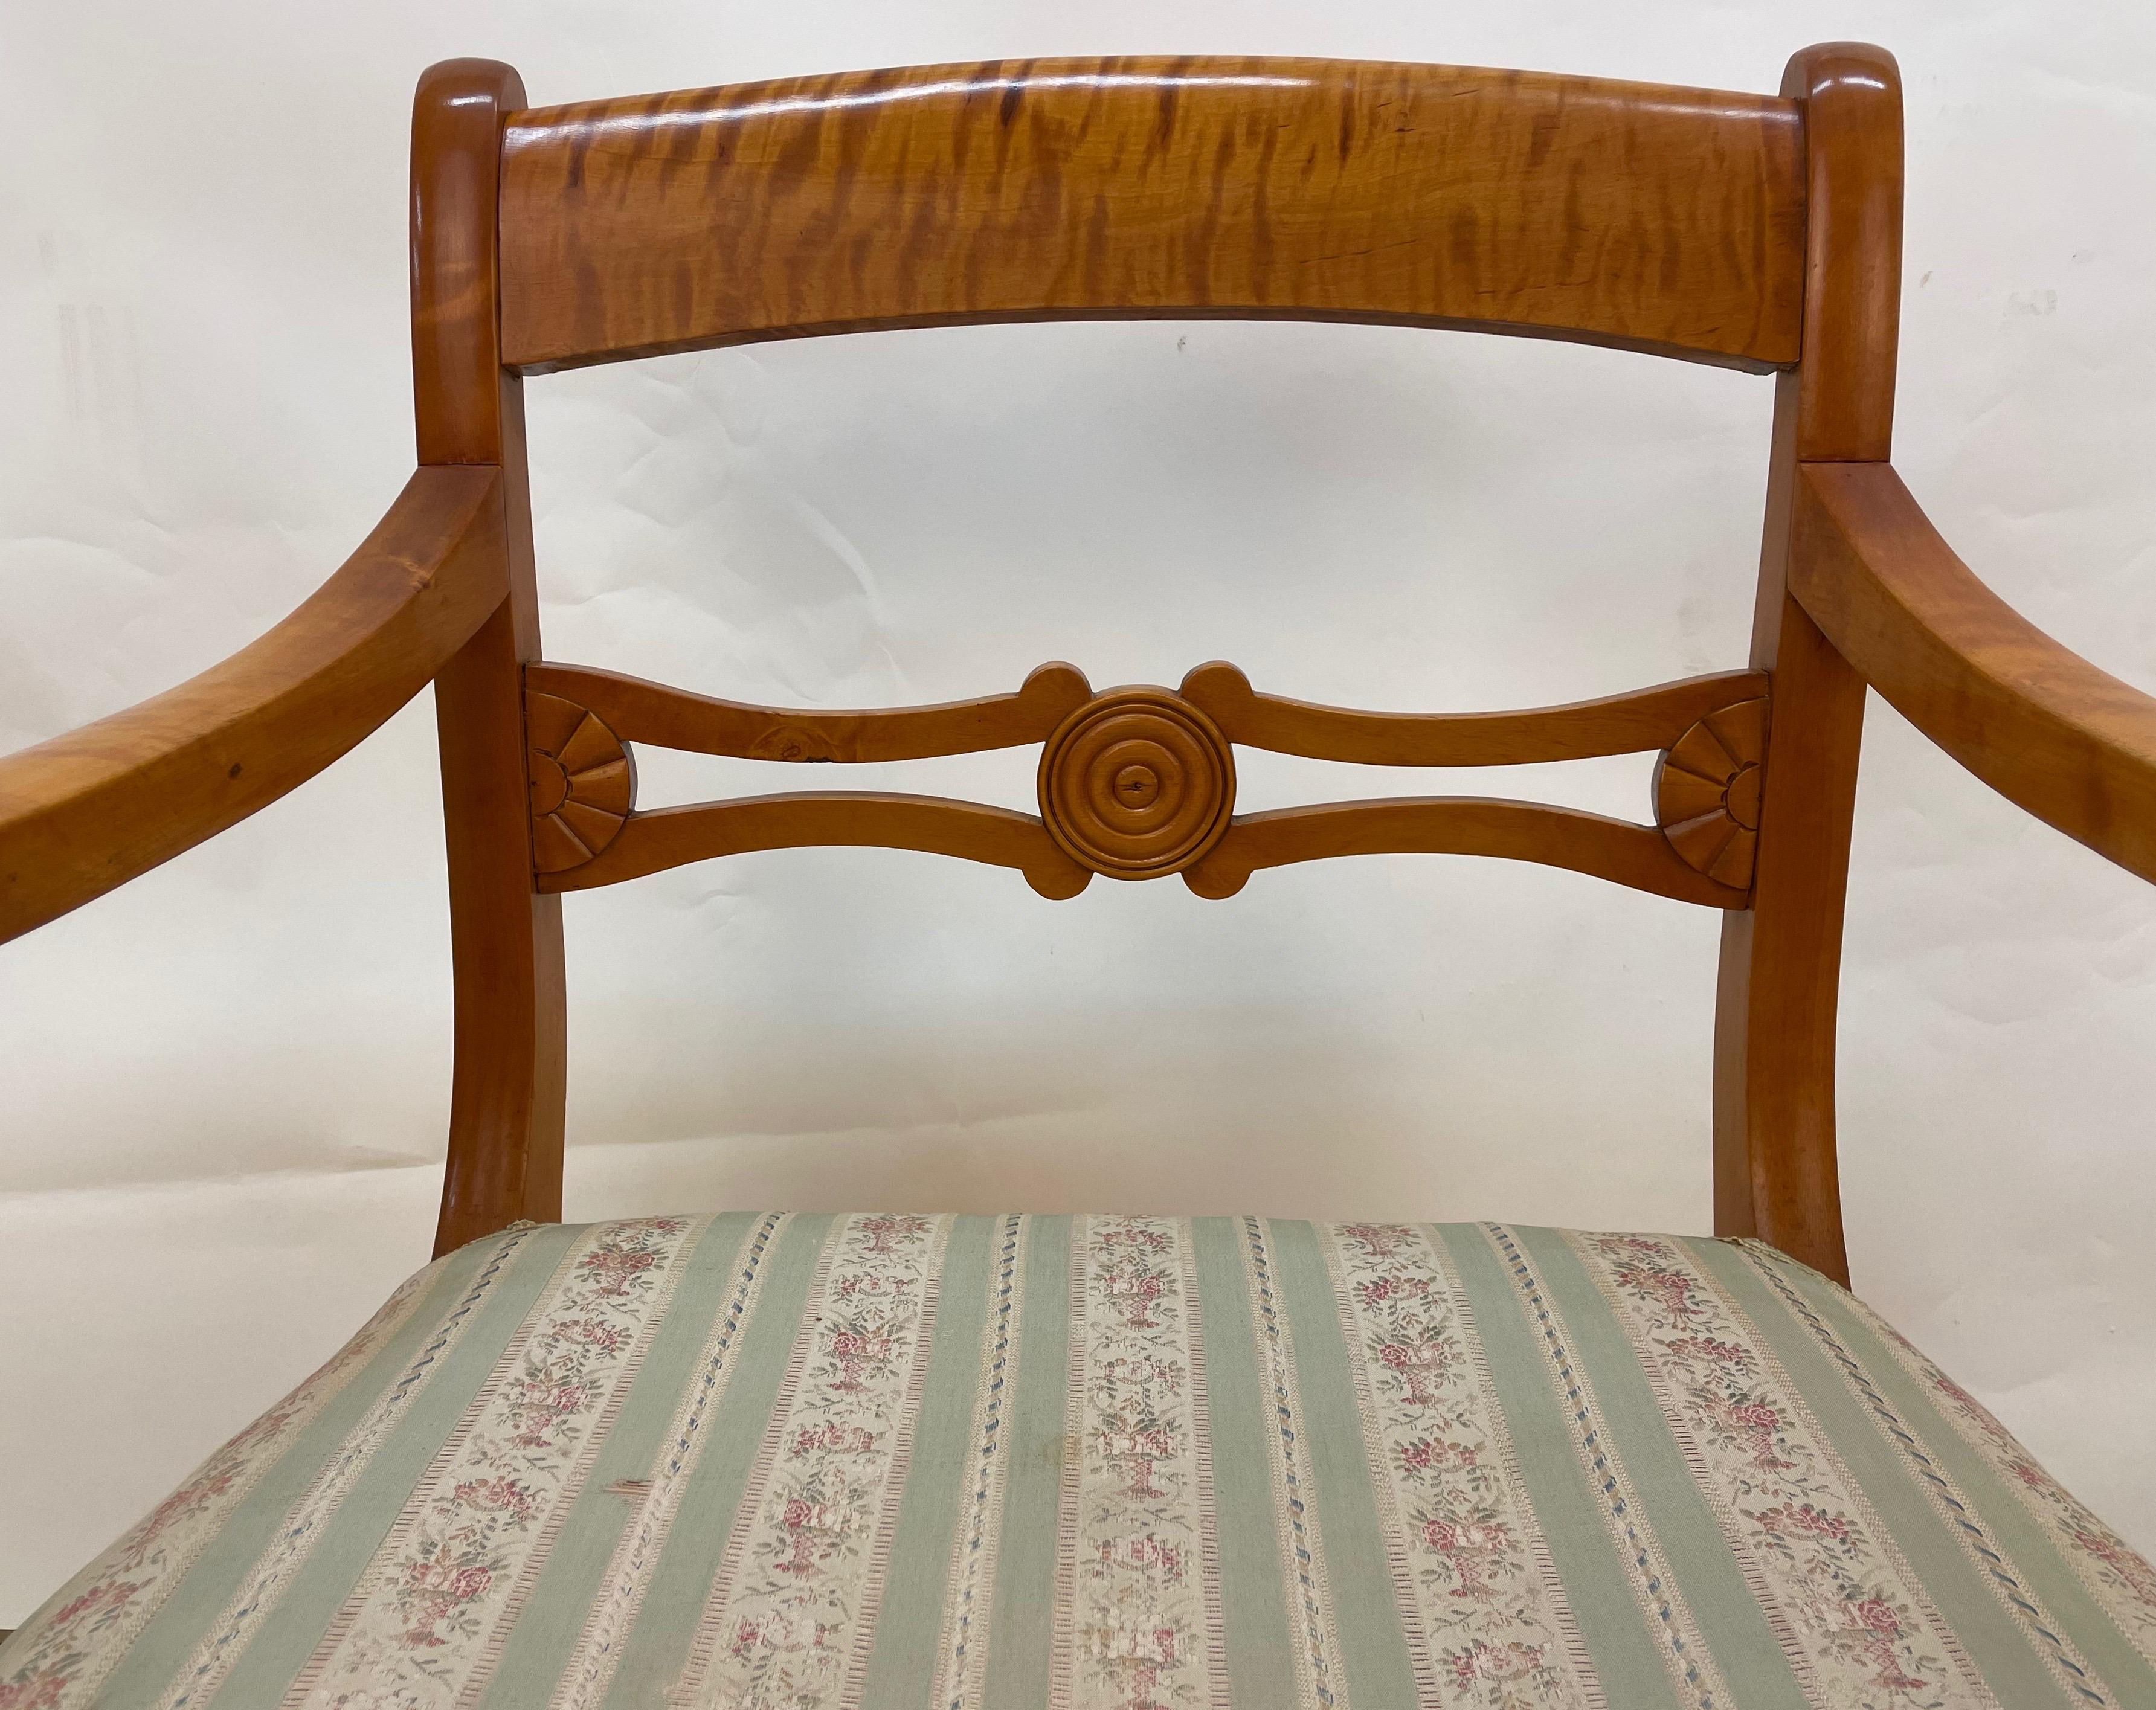 These graceful chairs were hand-made of golden nordic birch. In need of new fabric, this pair has otherwise aged beautifully. Over a hundred years old, these chairs will last a hundred more!